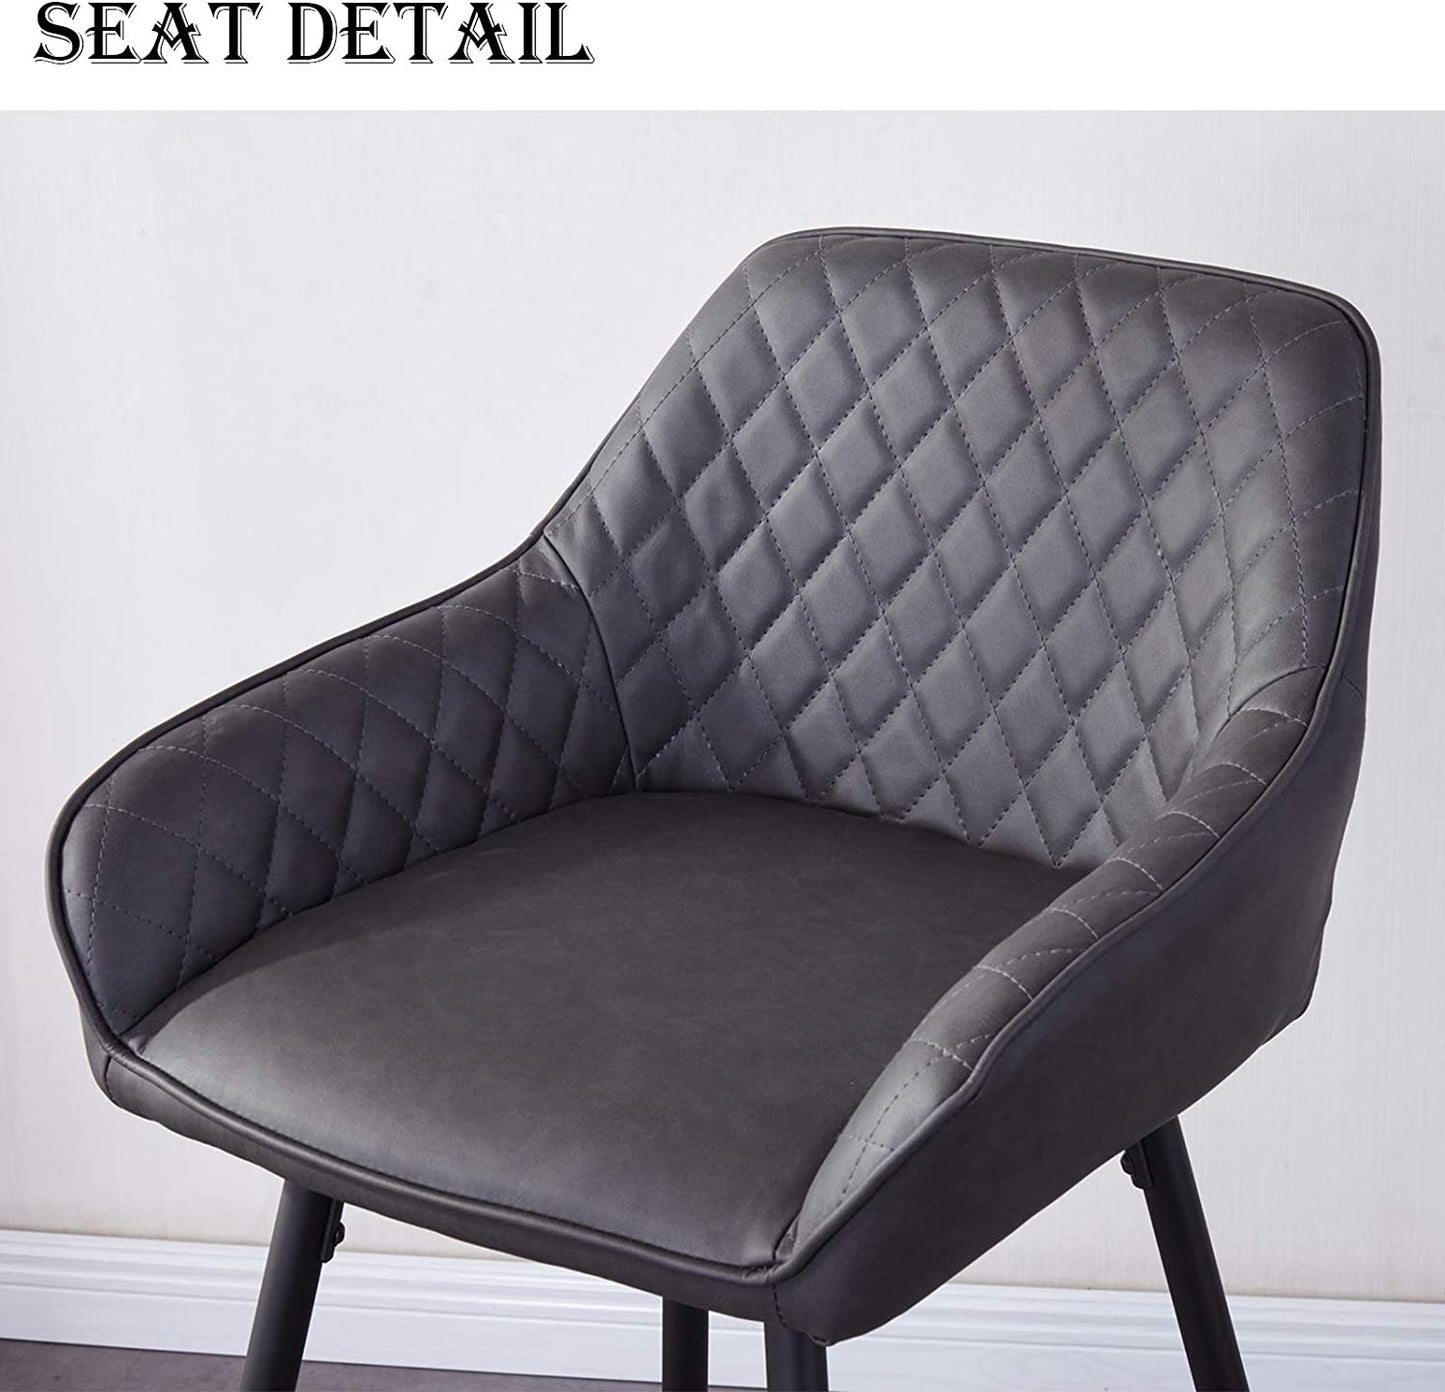 Set of 2 Dark Gray Faux Leather Upholstered Seat with Backrest